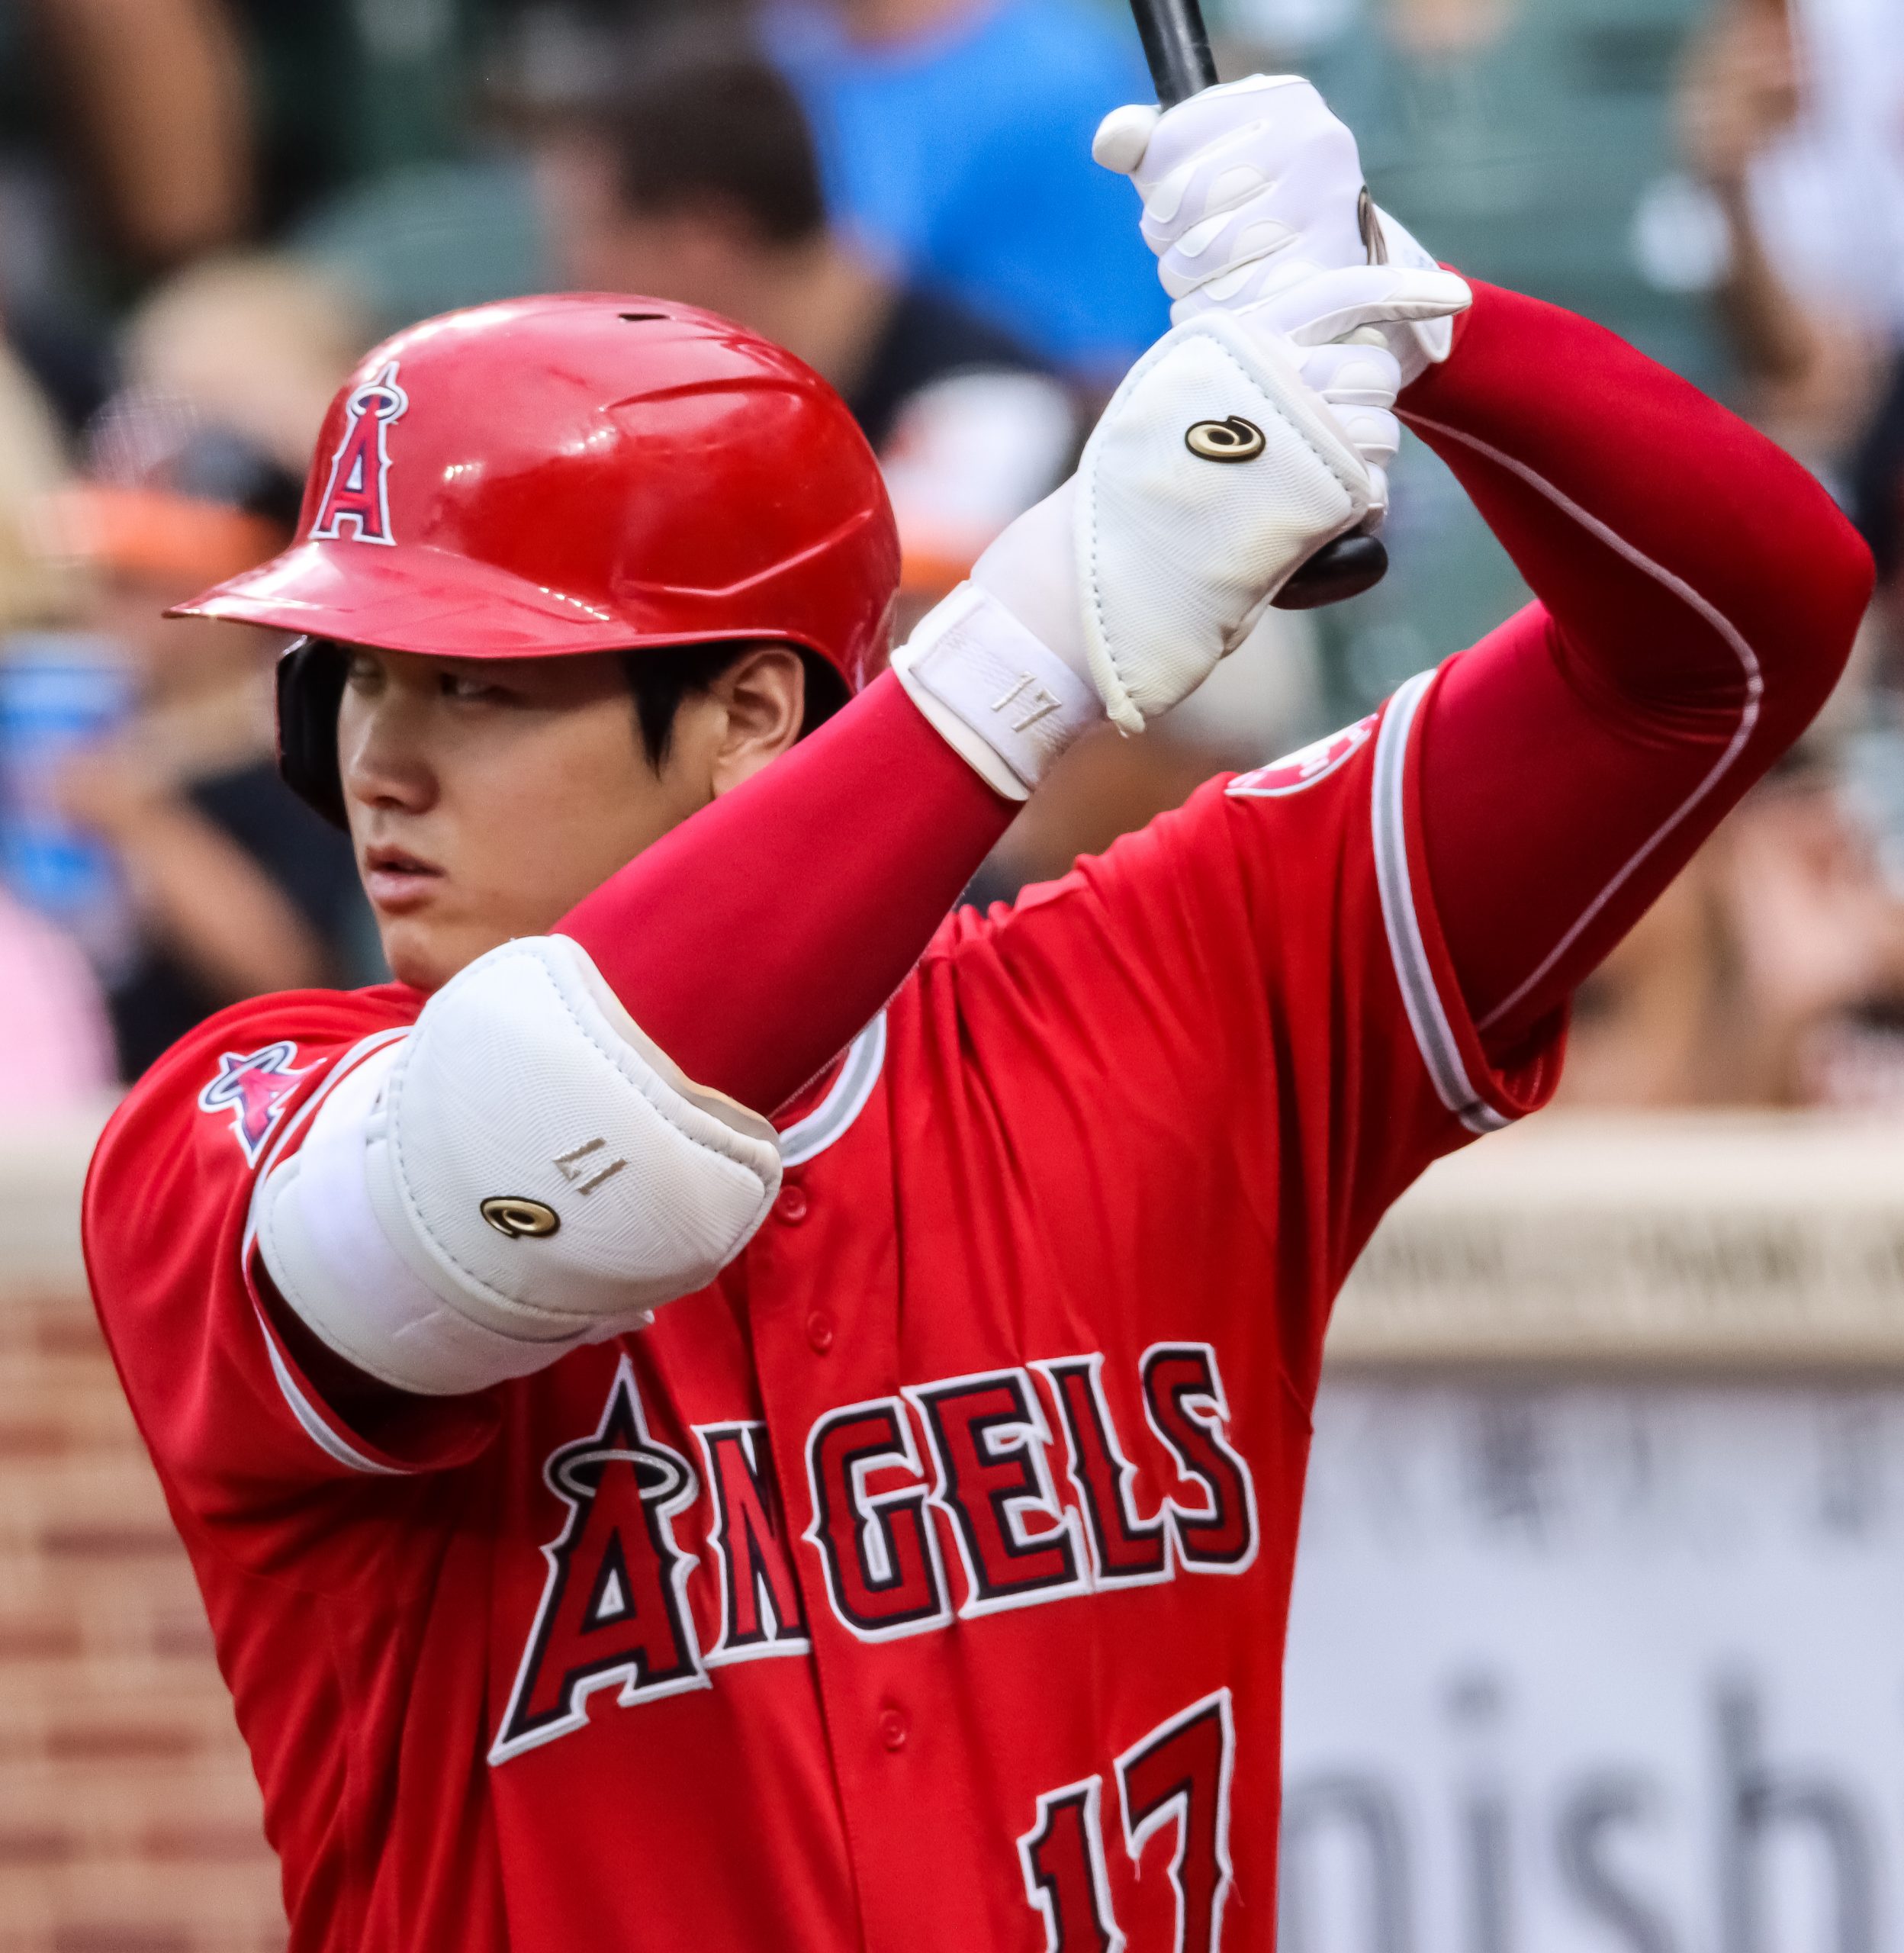 Shohei Ohtani first Japanese player voted to start in All-Star